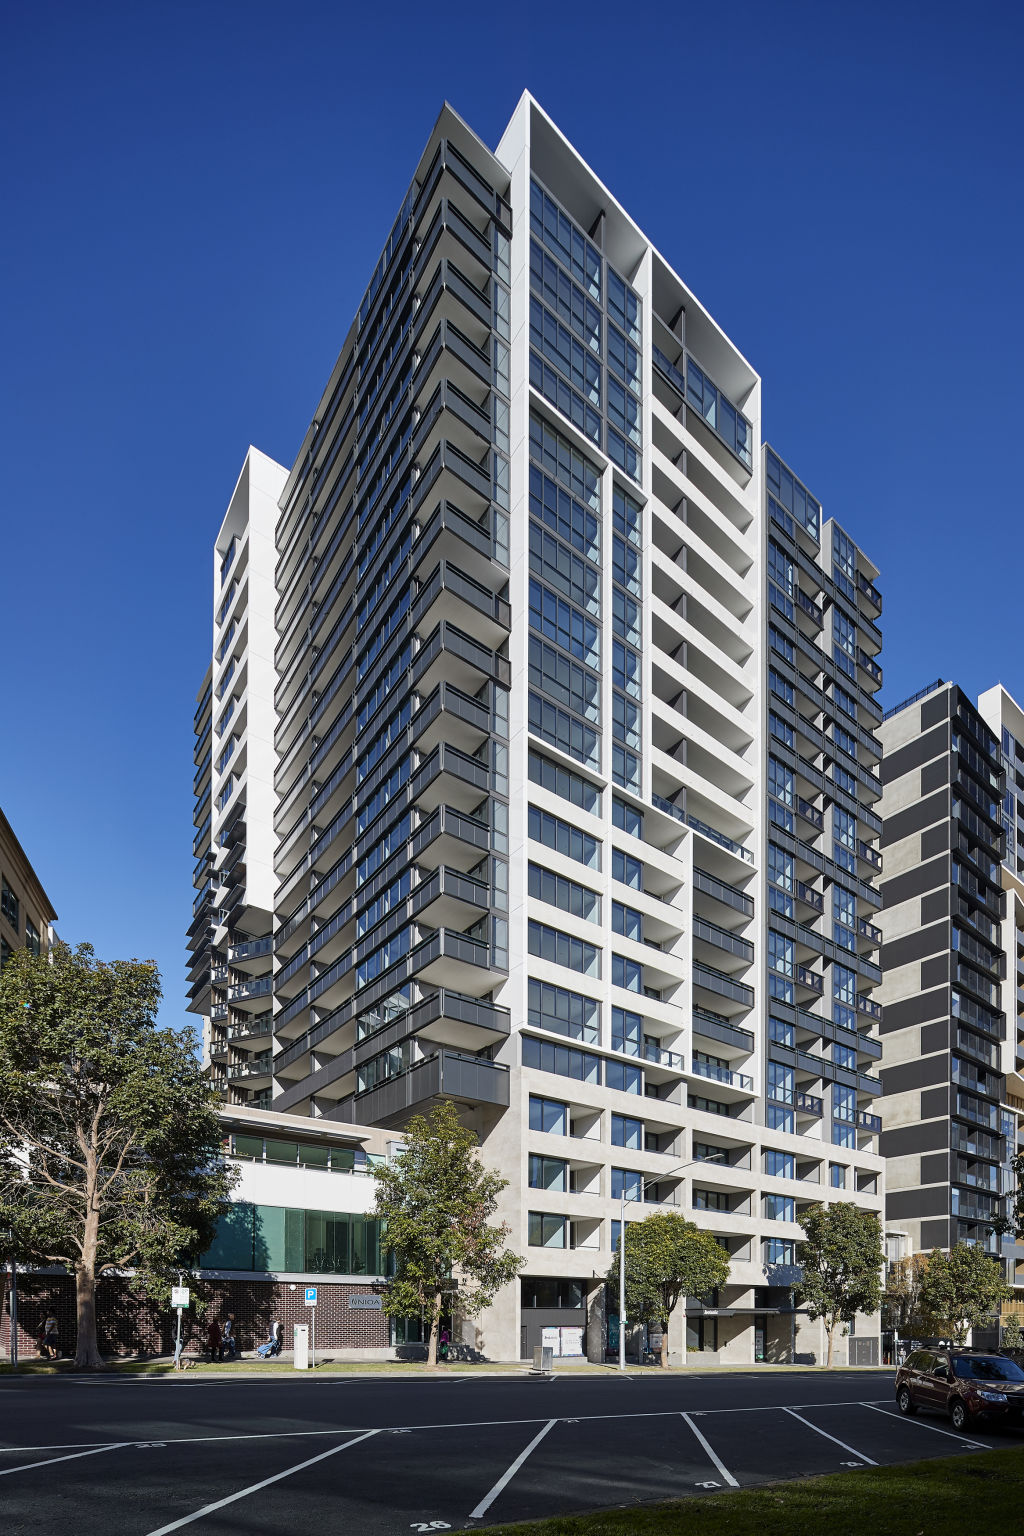 The developer of this Southbank building purchased airspace over a neighbouring building to install cantilevered balconies on the eastern face.  Photo: Supplied